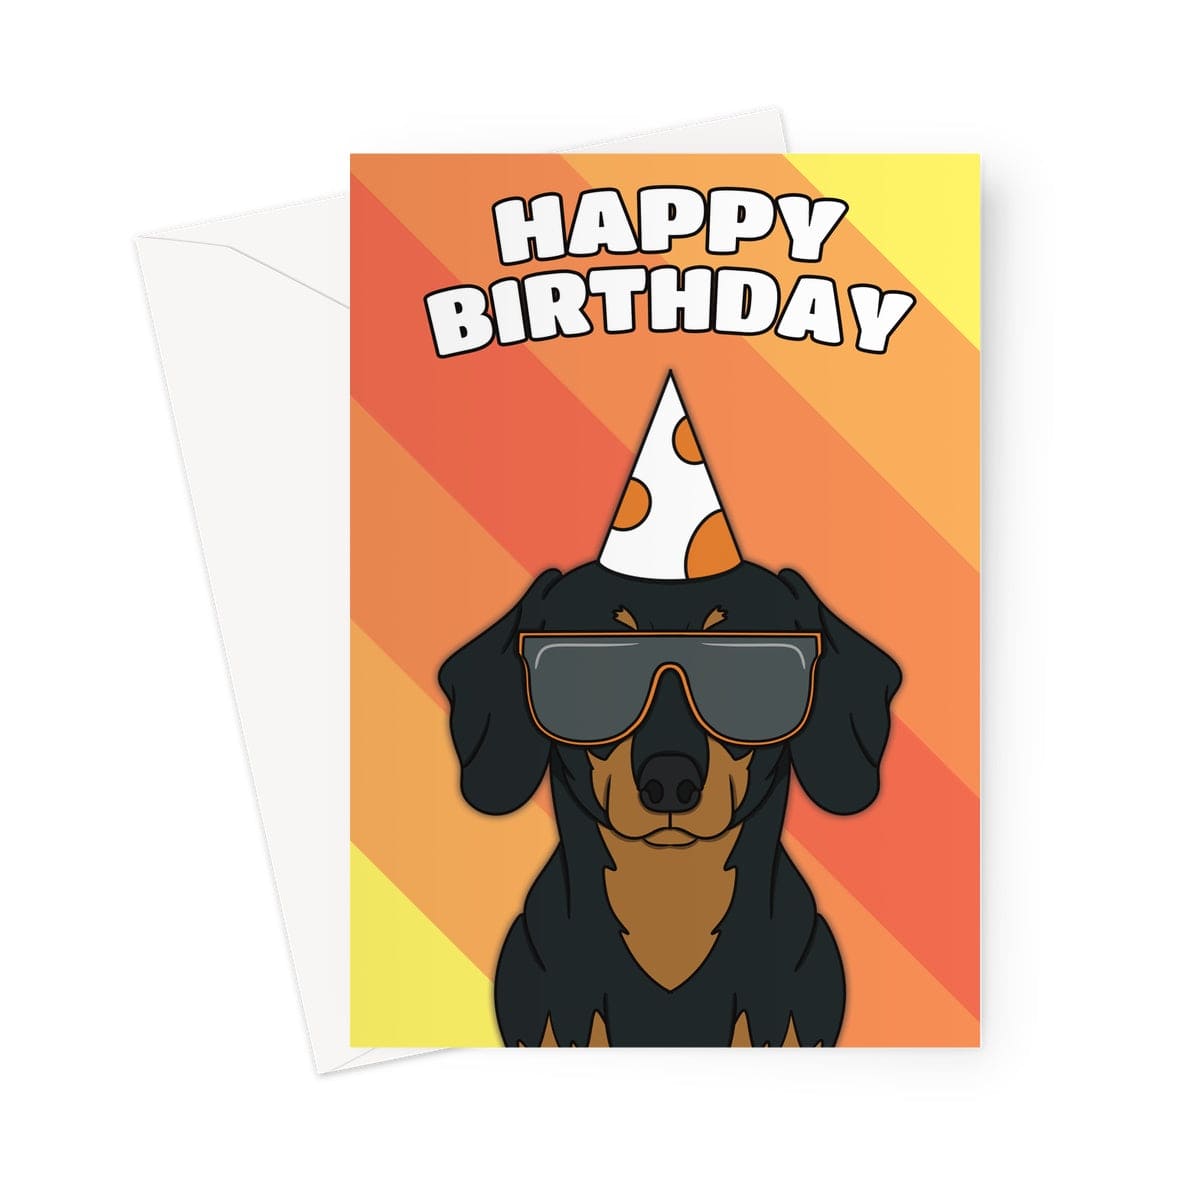 A cute Sausage dog birthday card by Cupsie's Creations.